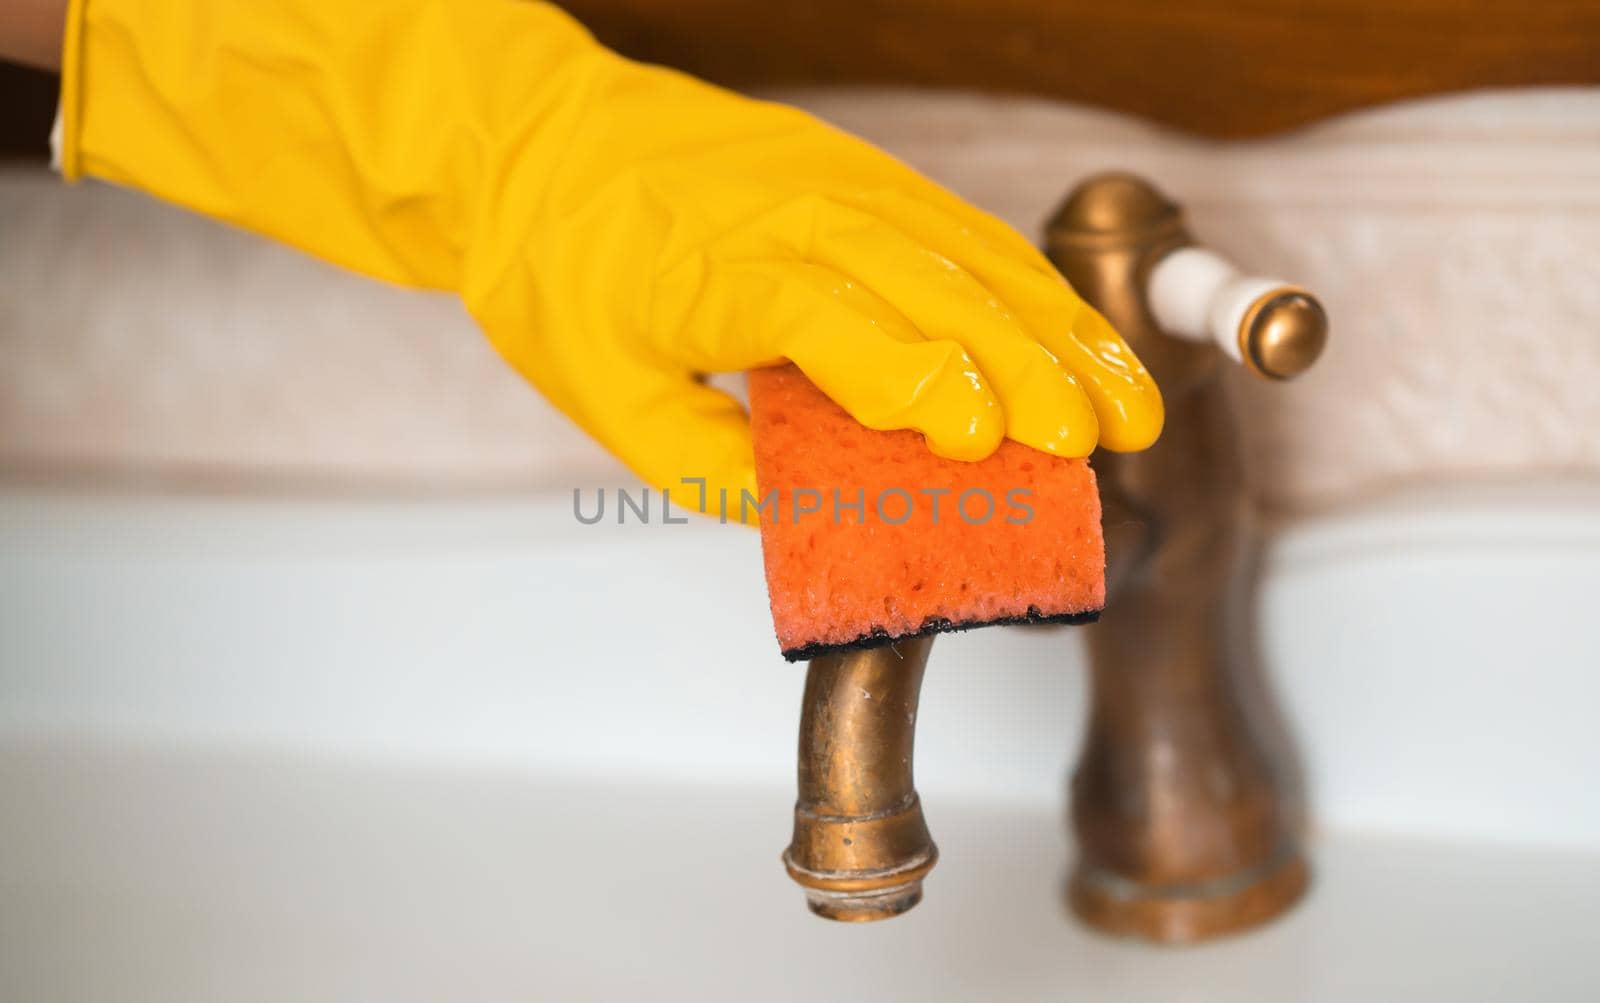 A woman in rubber gloves is cleaning the house, creating cleanliness and disinfection, wiping the faucet and wash basin in the bathroom with a sponge.